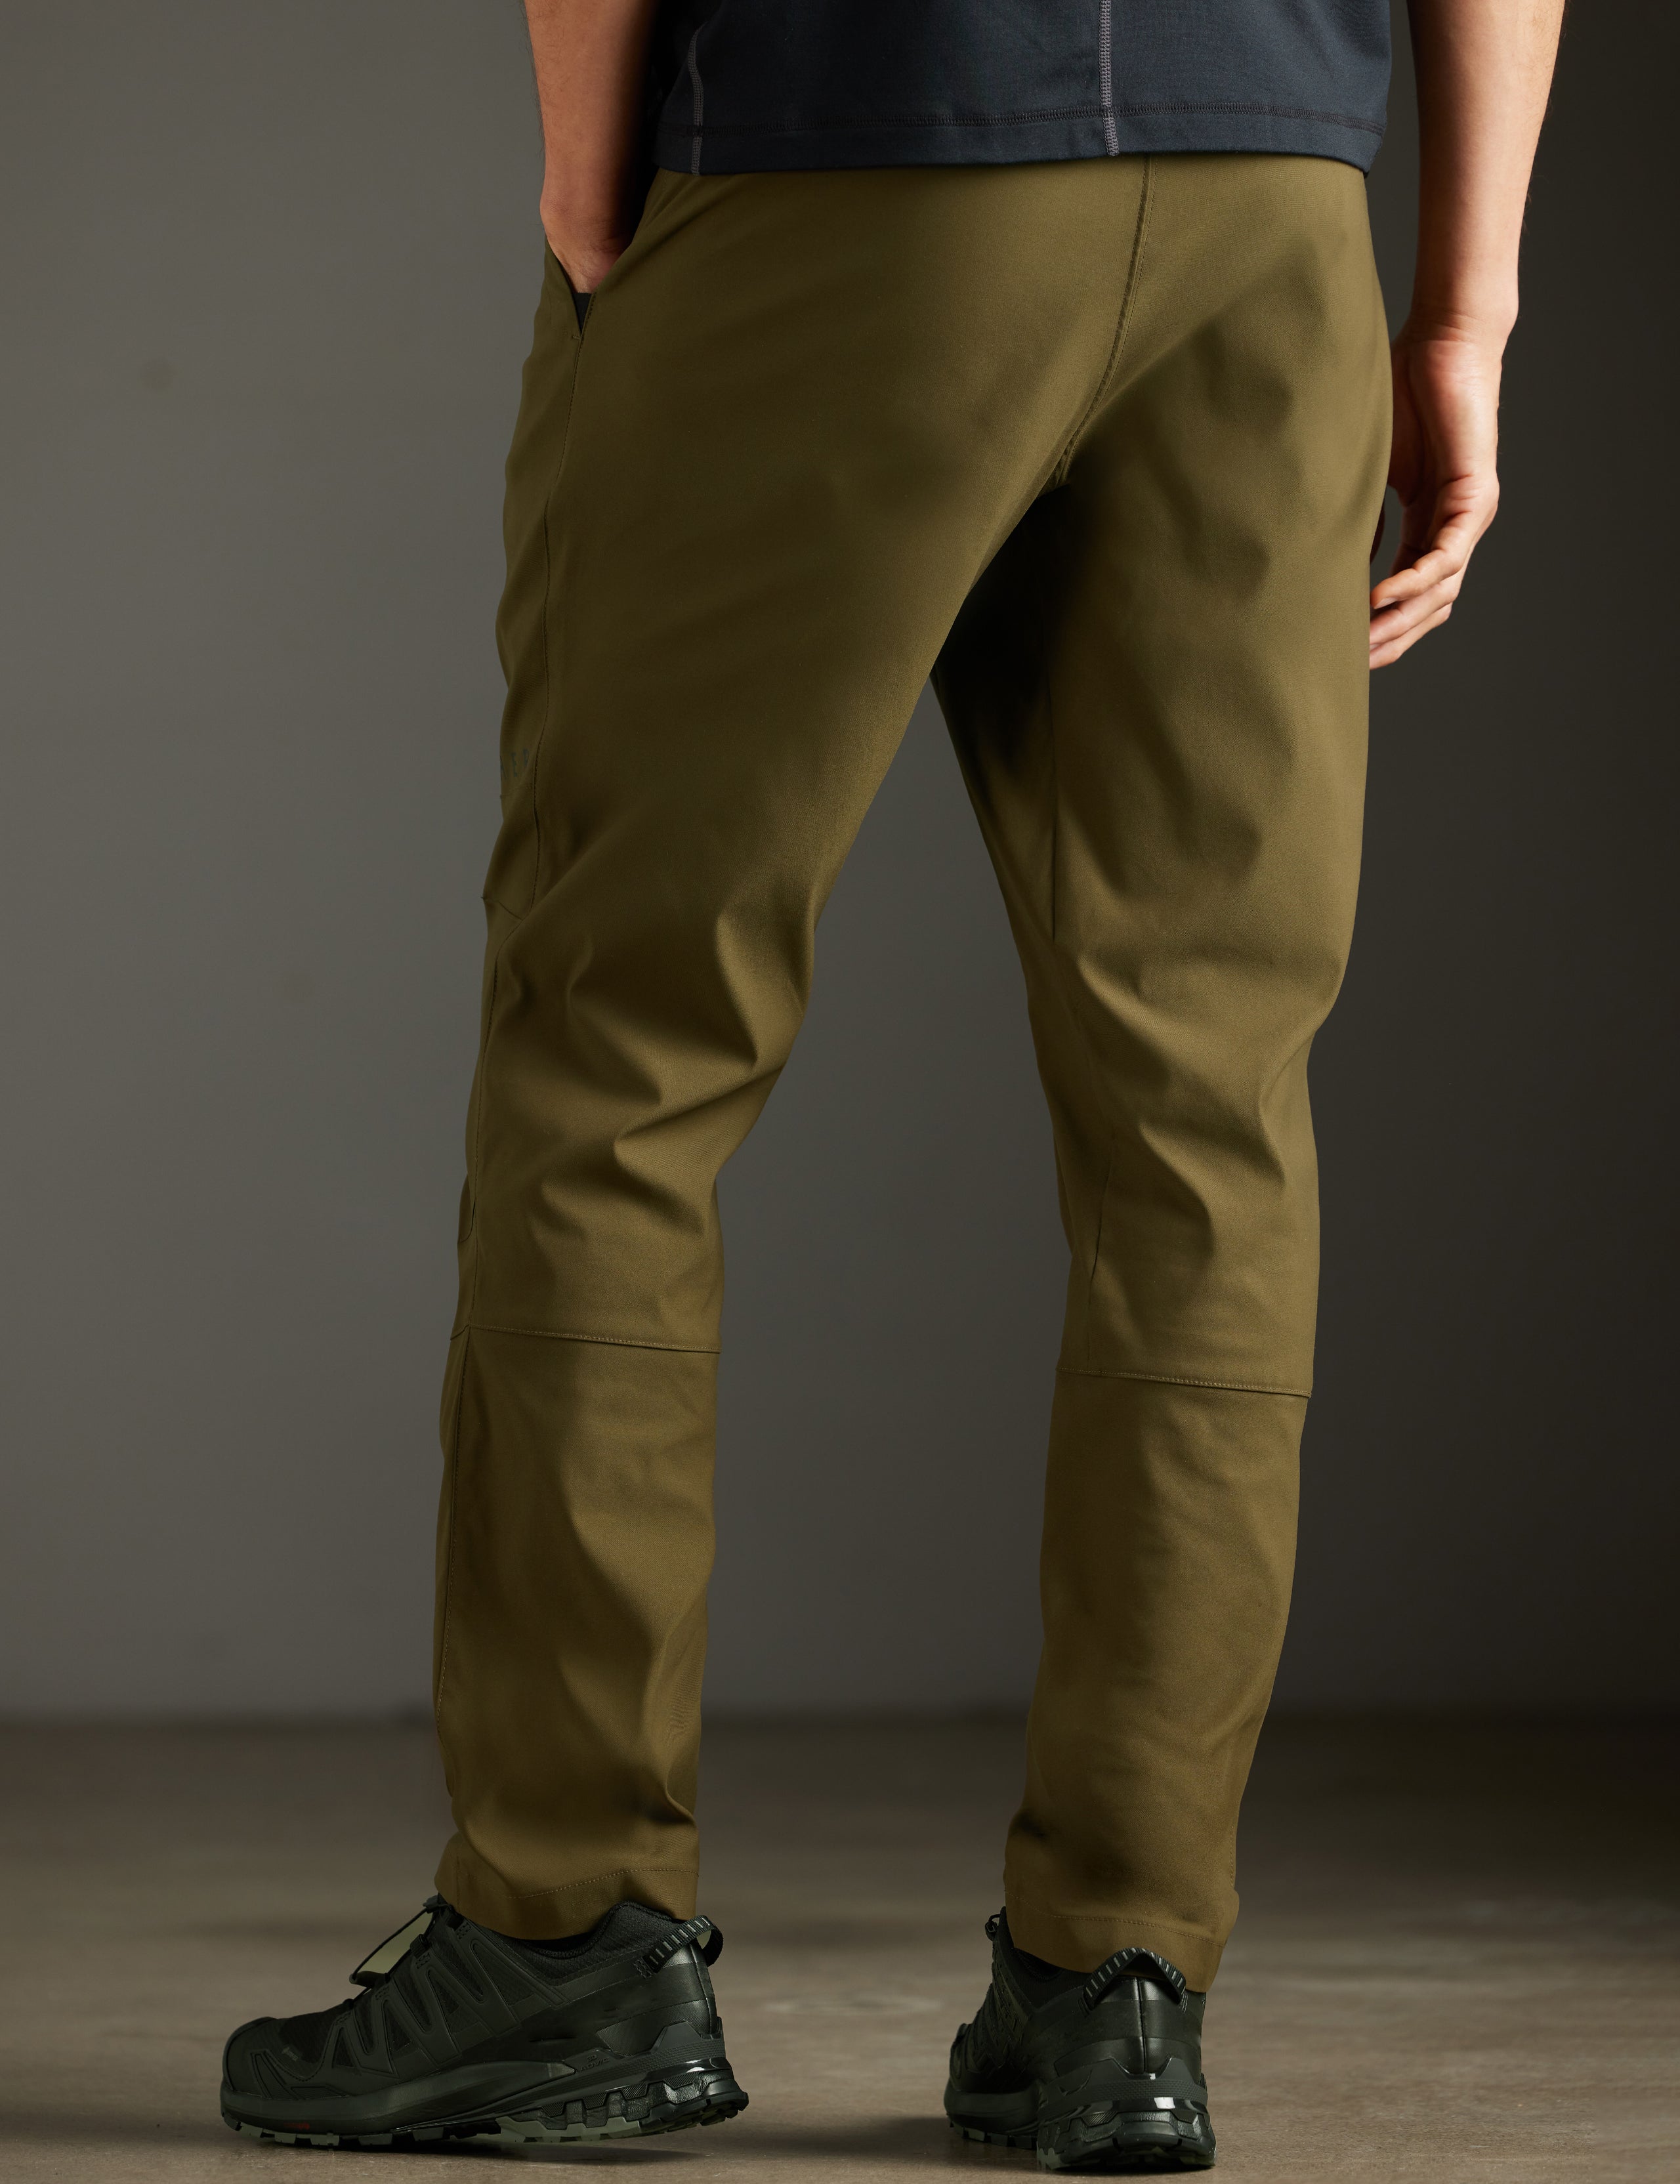 green men's pants from AETHER Apparel